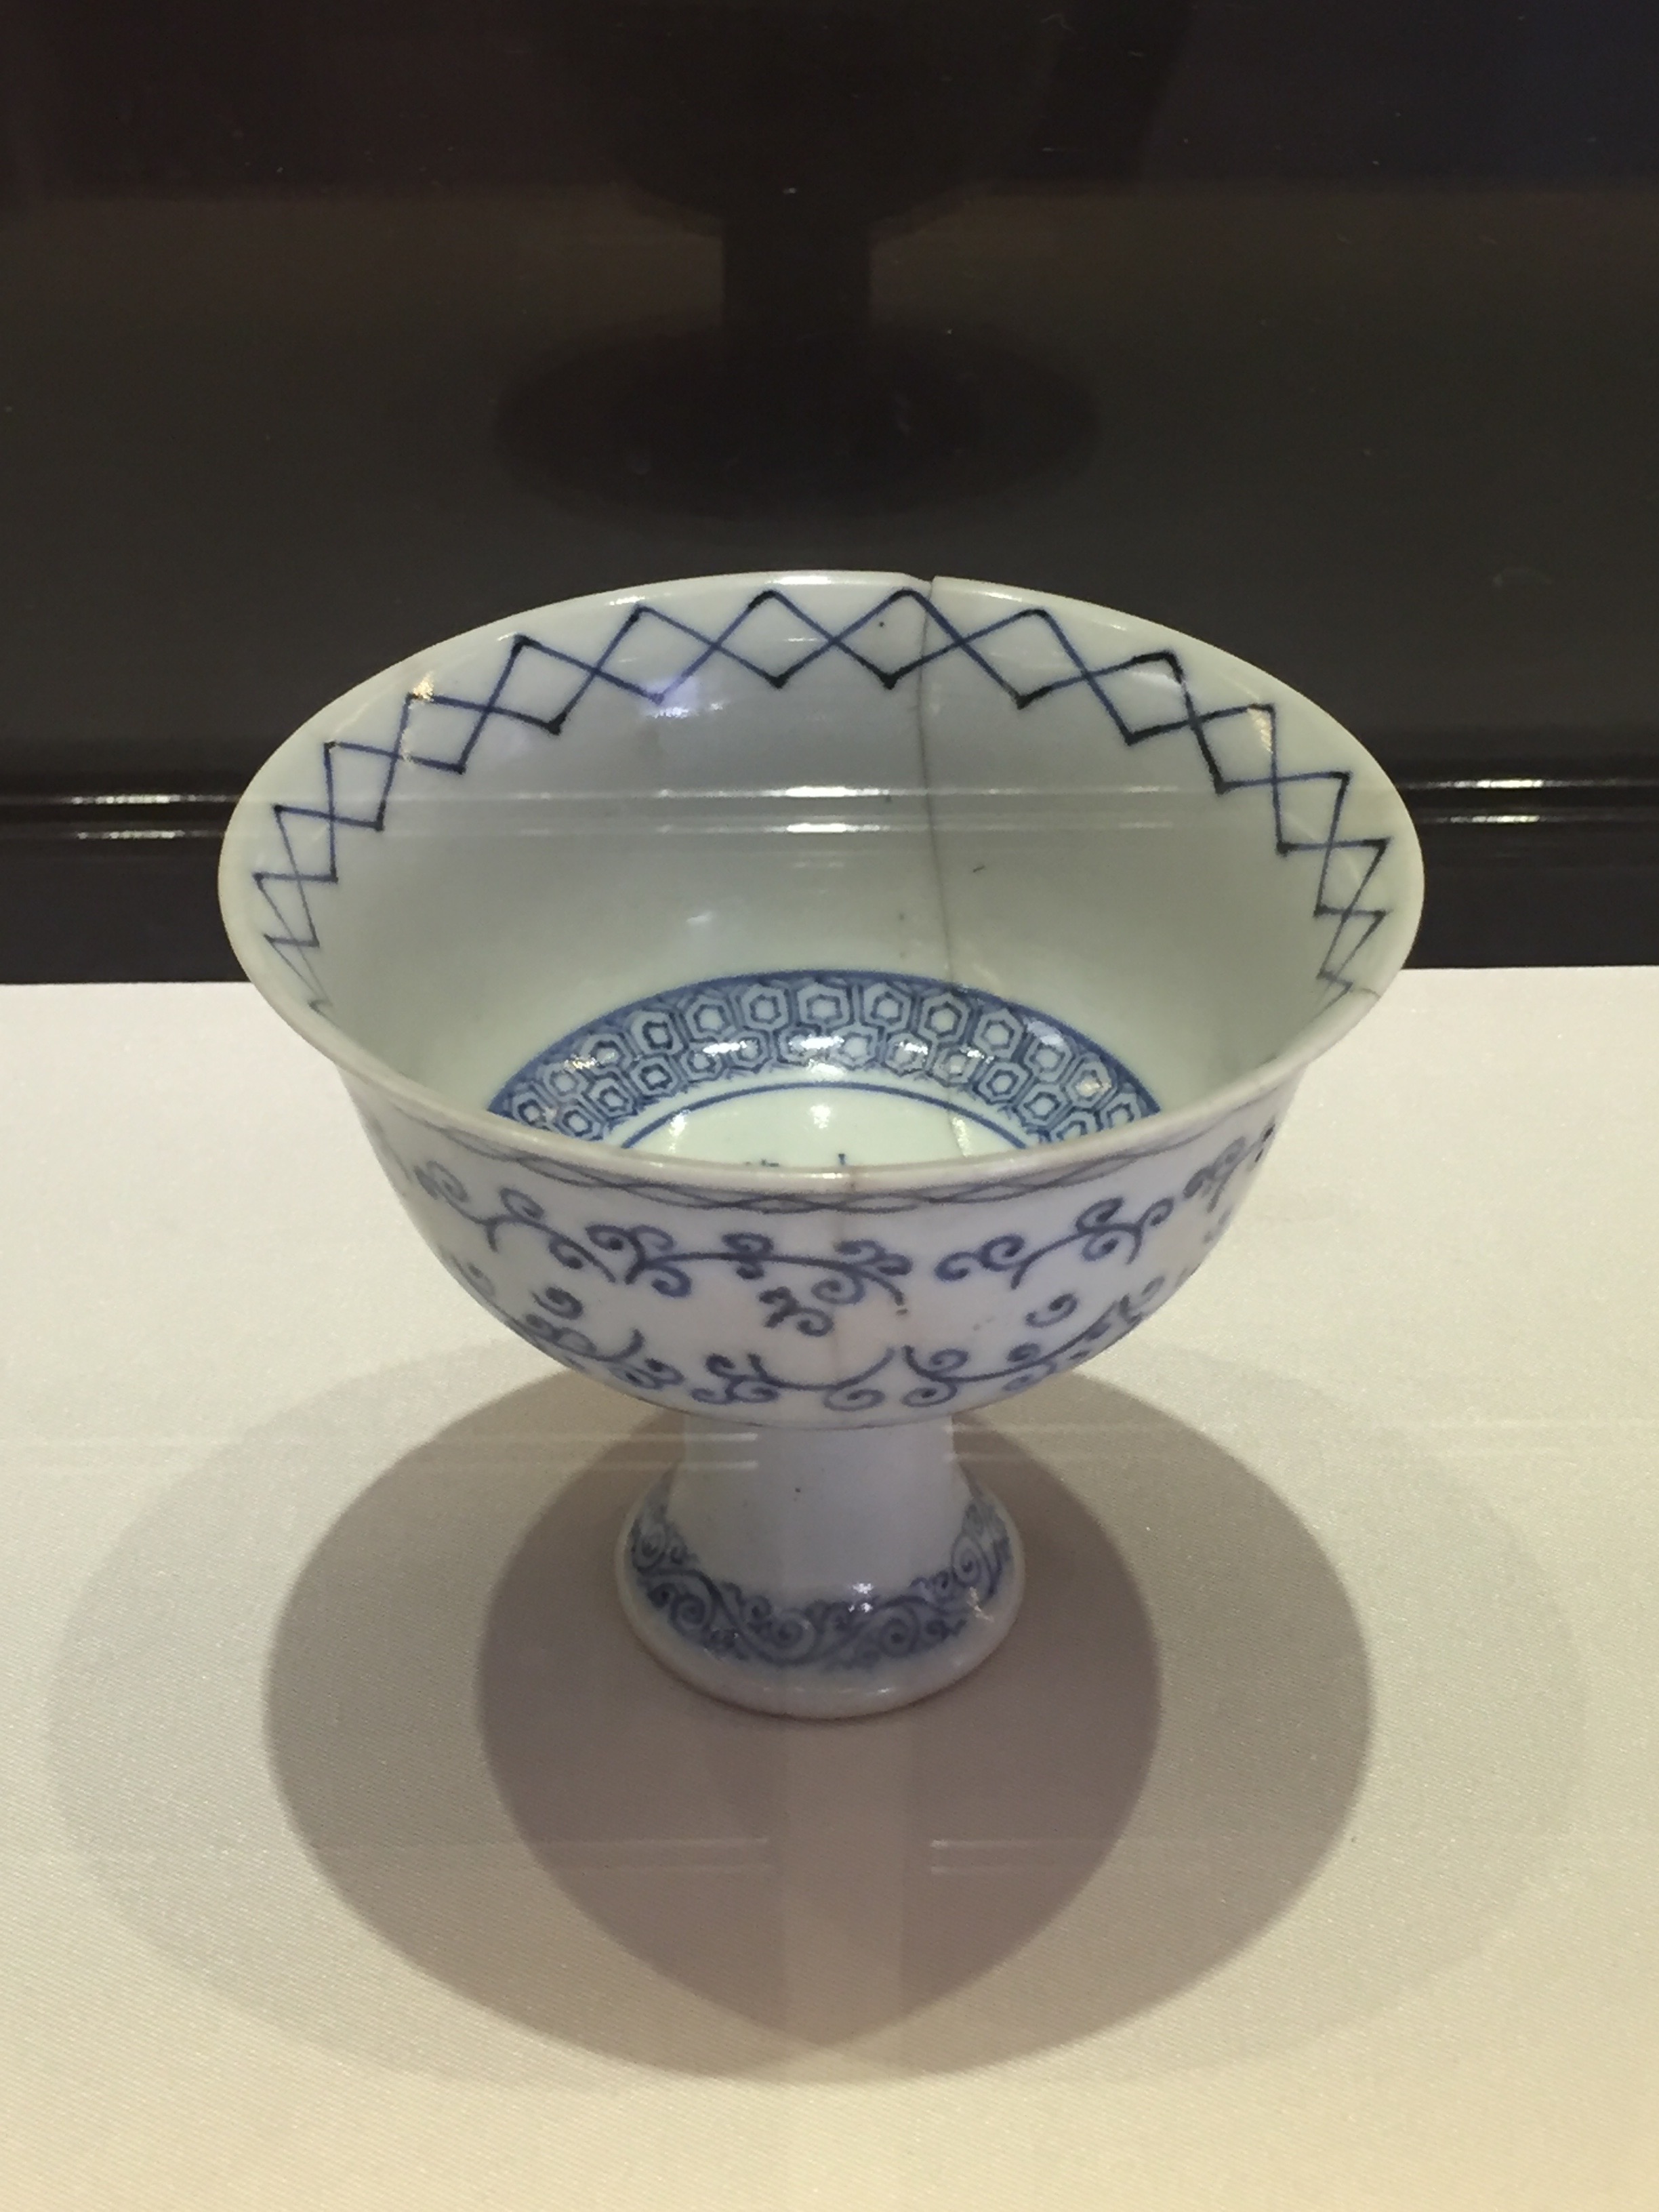  Blue and White Stem Bowl Traced in Gold  Xuande Emperor's Reign (1426-1435), Ming Dynasty 